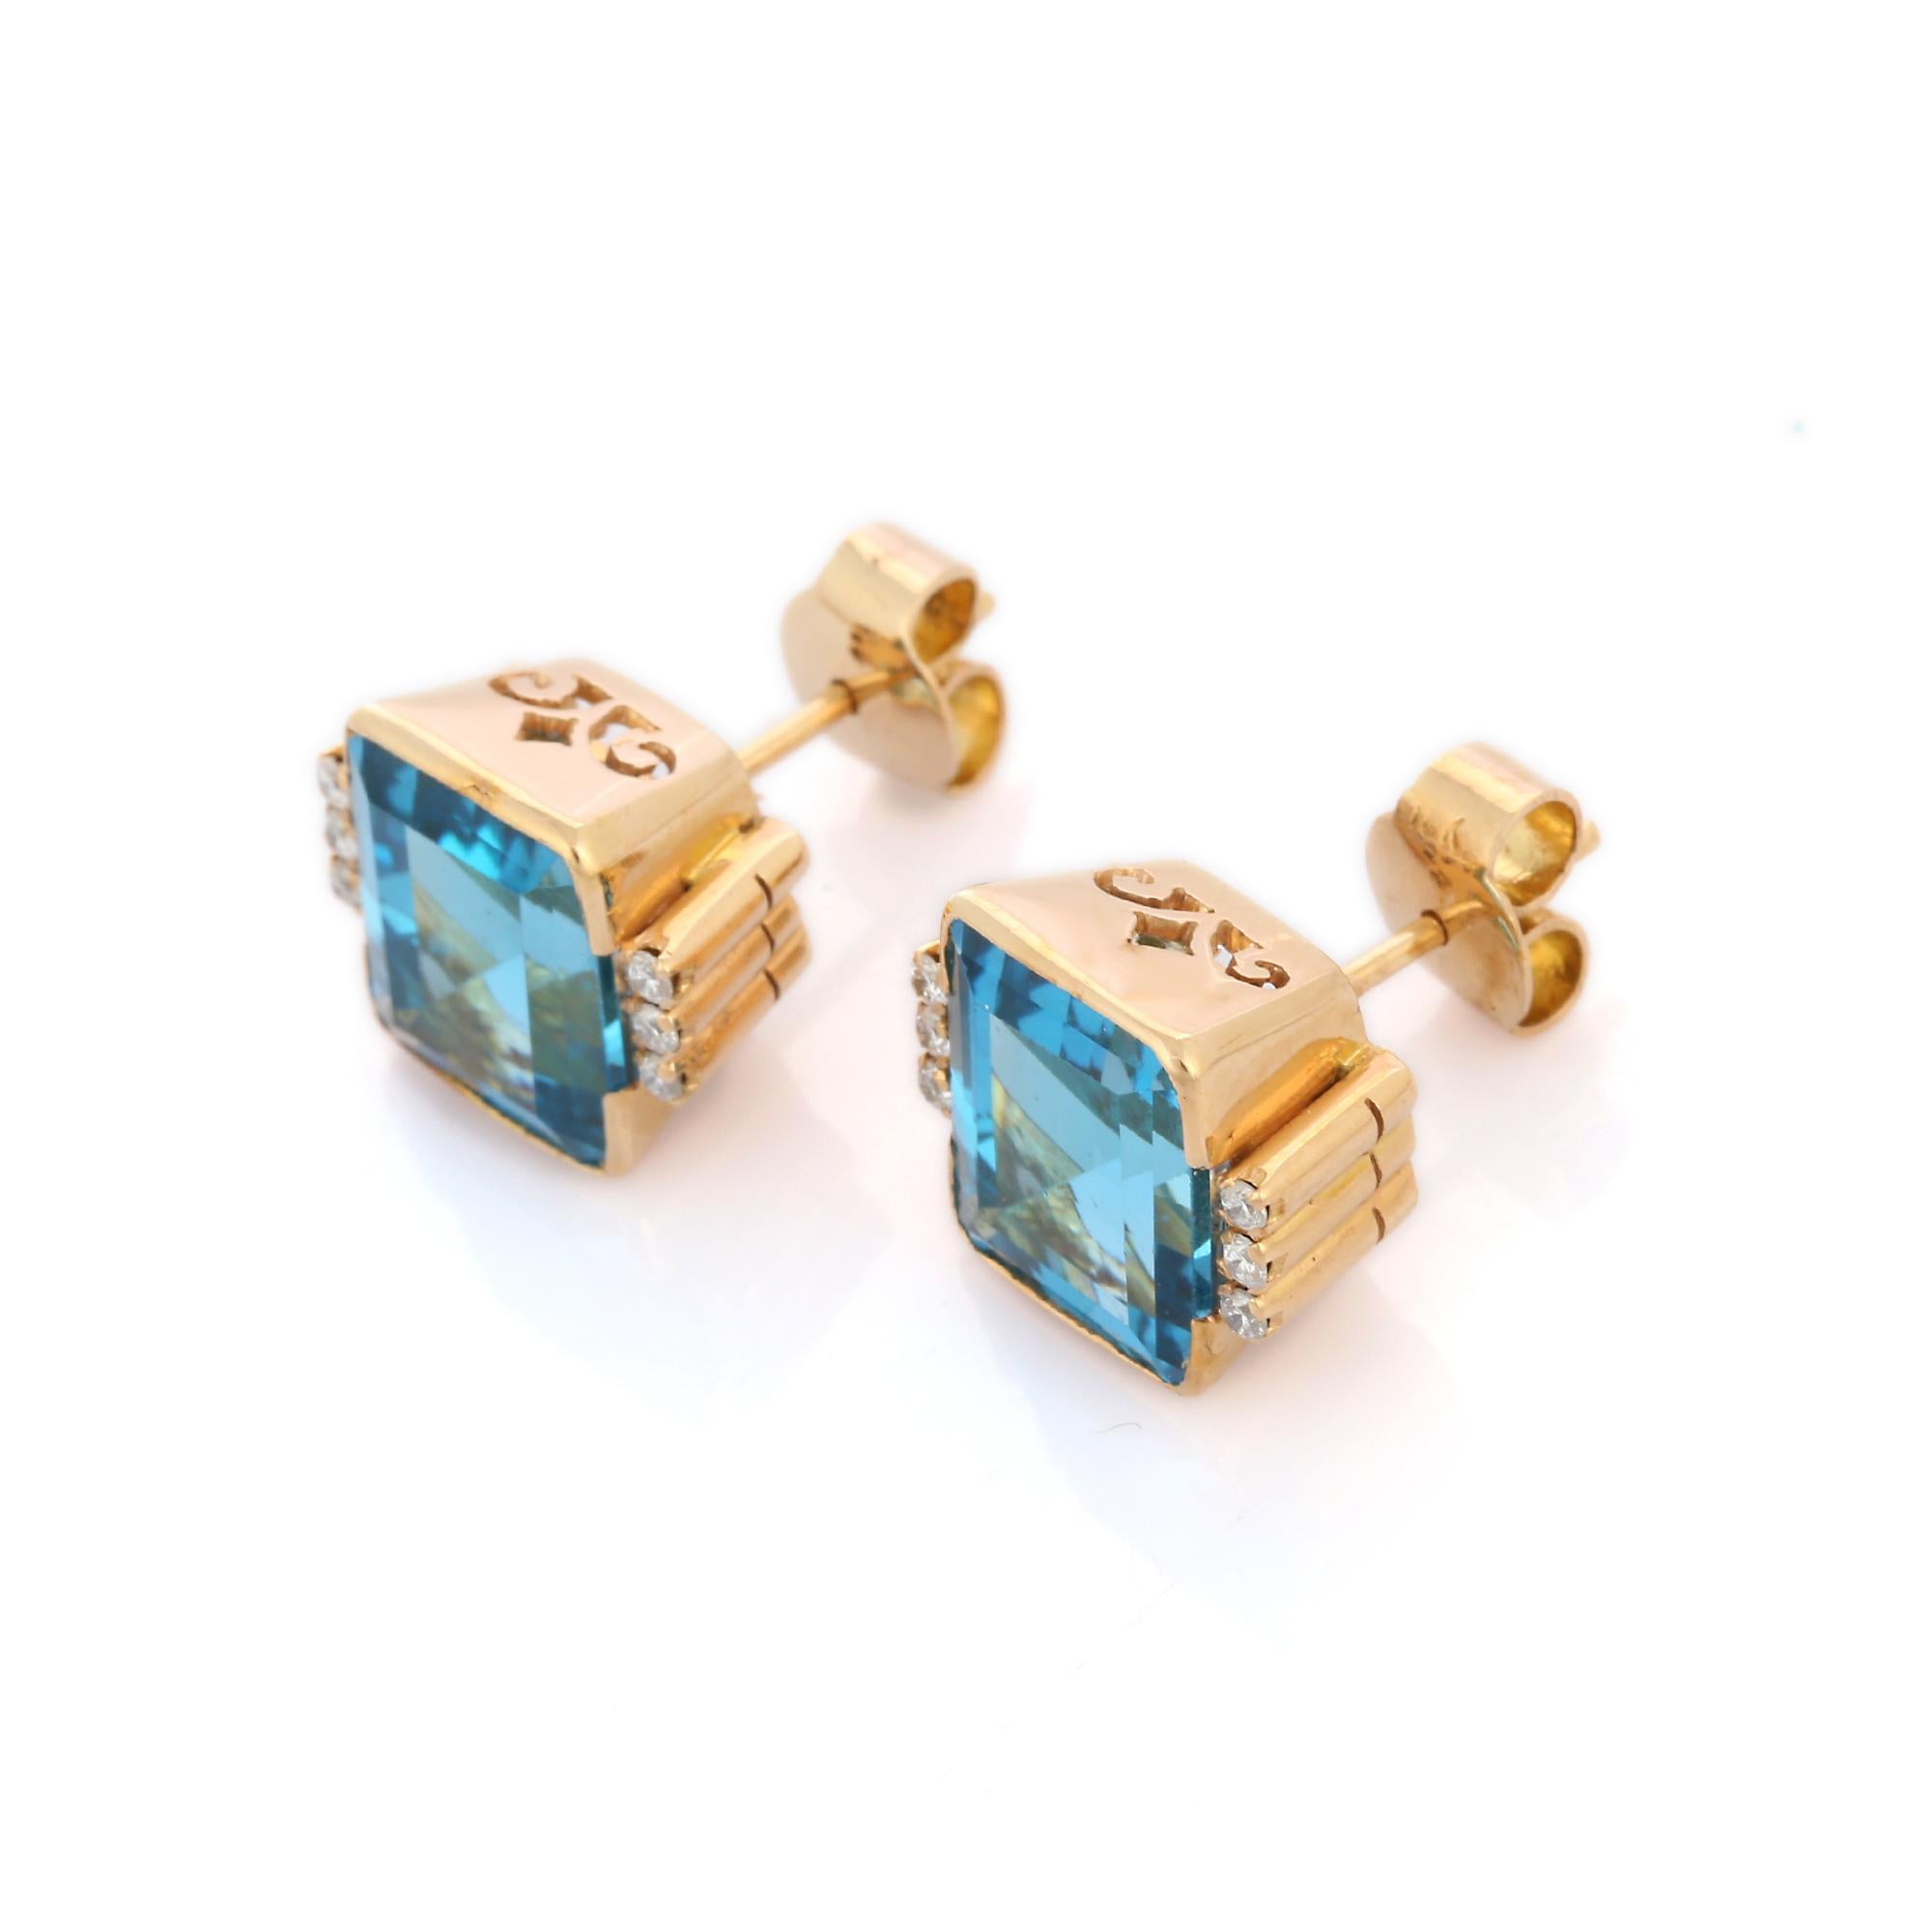 Cushion Cut Genuine Blue Topaz 15.15 Ct Stud Earrings with Diamonds in 18K Yellow Gold For Sale